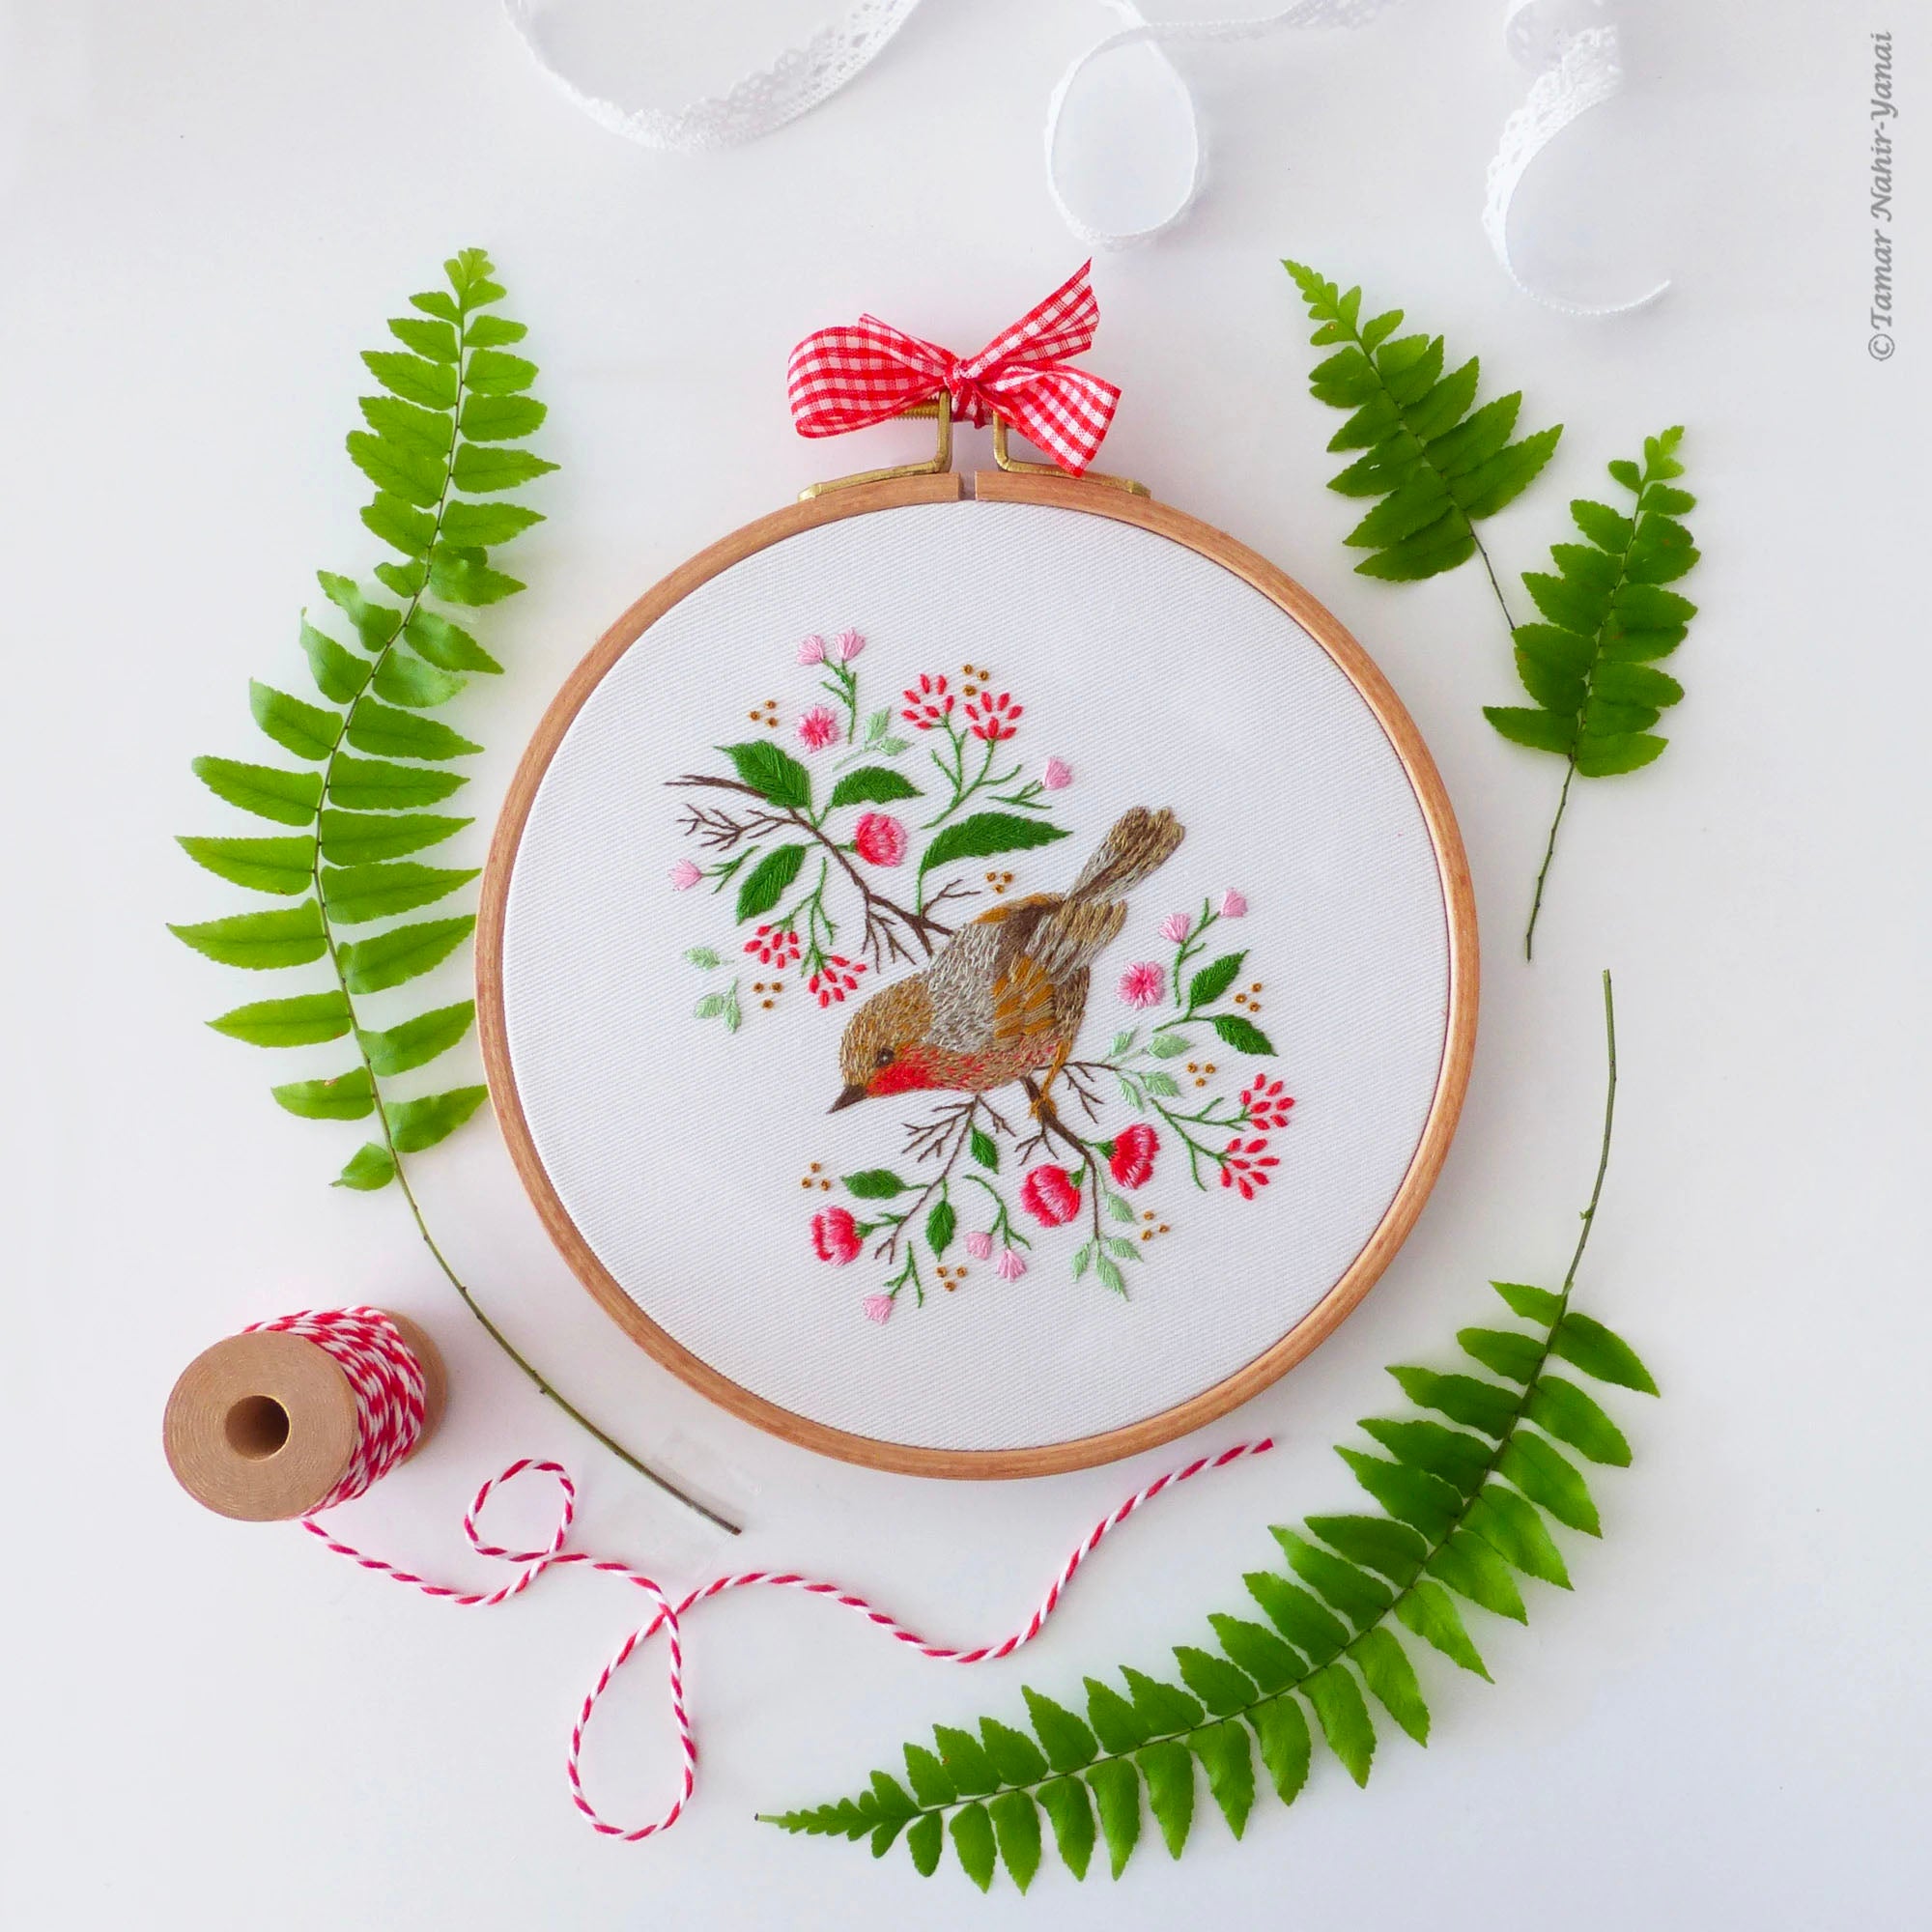 Christmas Deer Hand Embroidery Kit - Stitched Modern